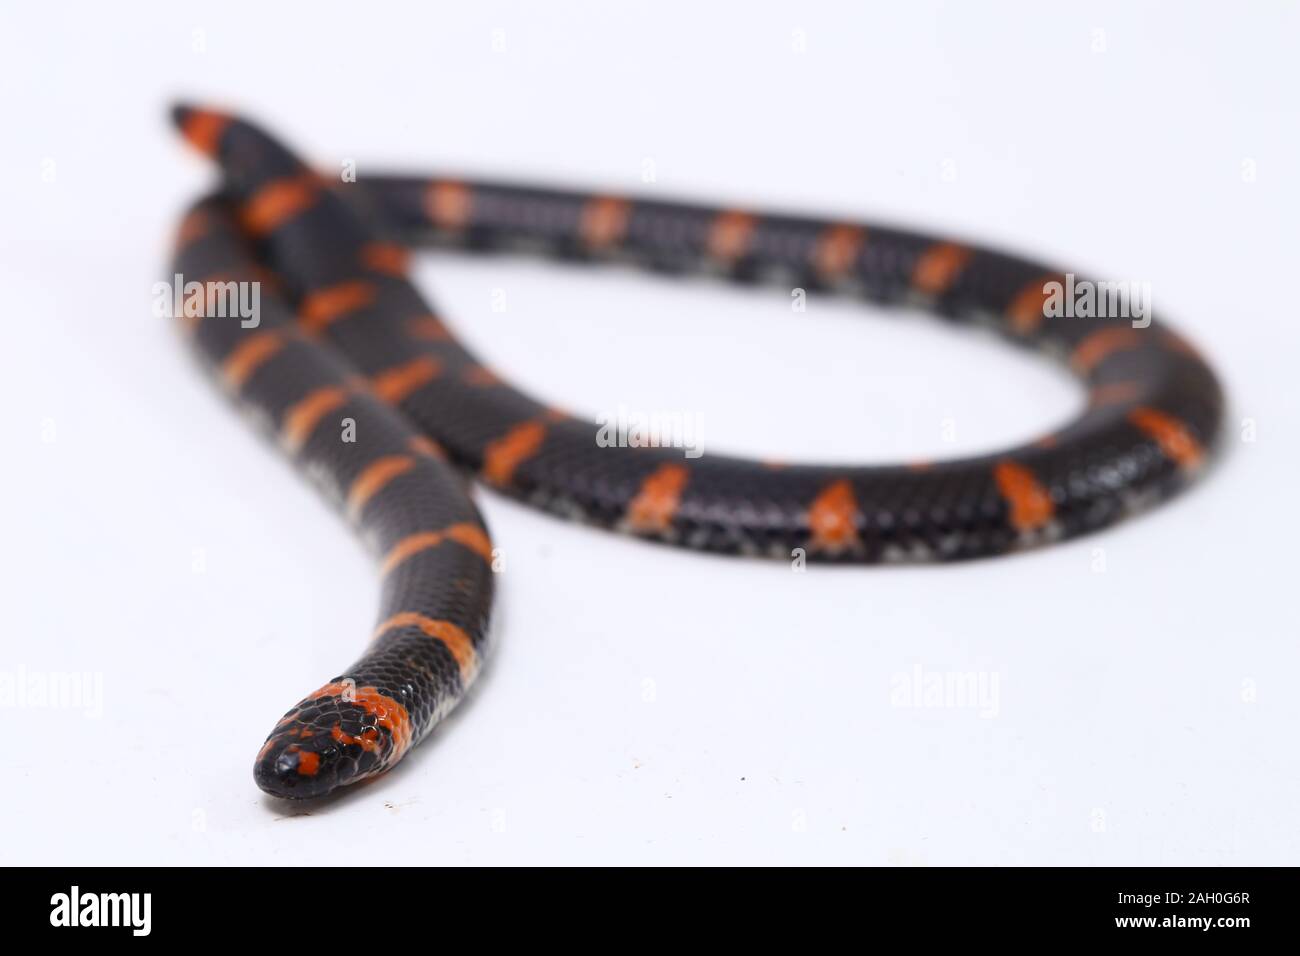 https://c8.alamy.com/comp/2AH0G6R/red-tailed-pipe-snake-scientific-name-cylindrophis-ruffus-isolate-on-white-background-2AH0G6R.jpg